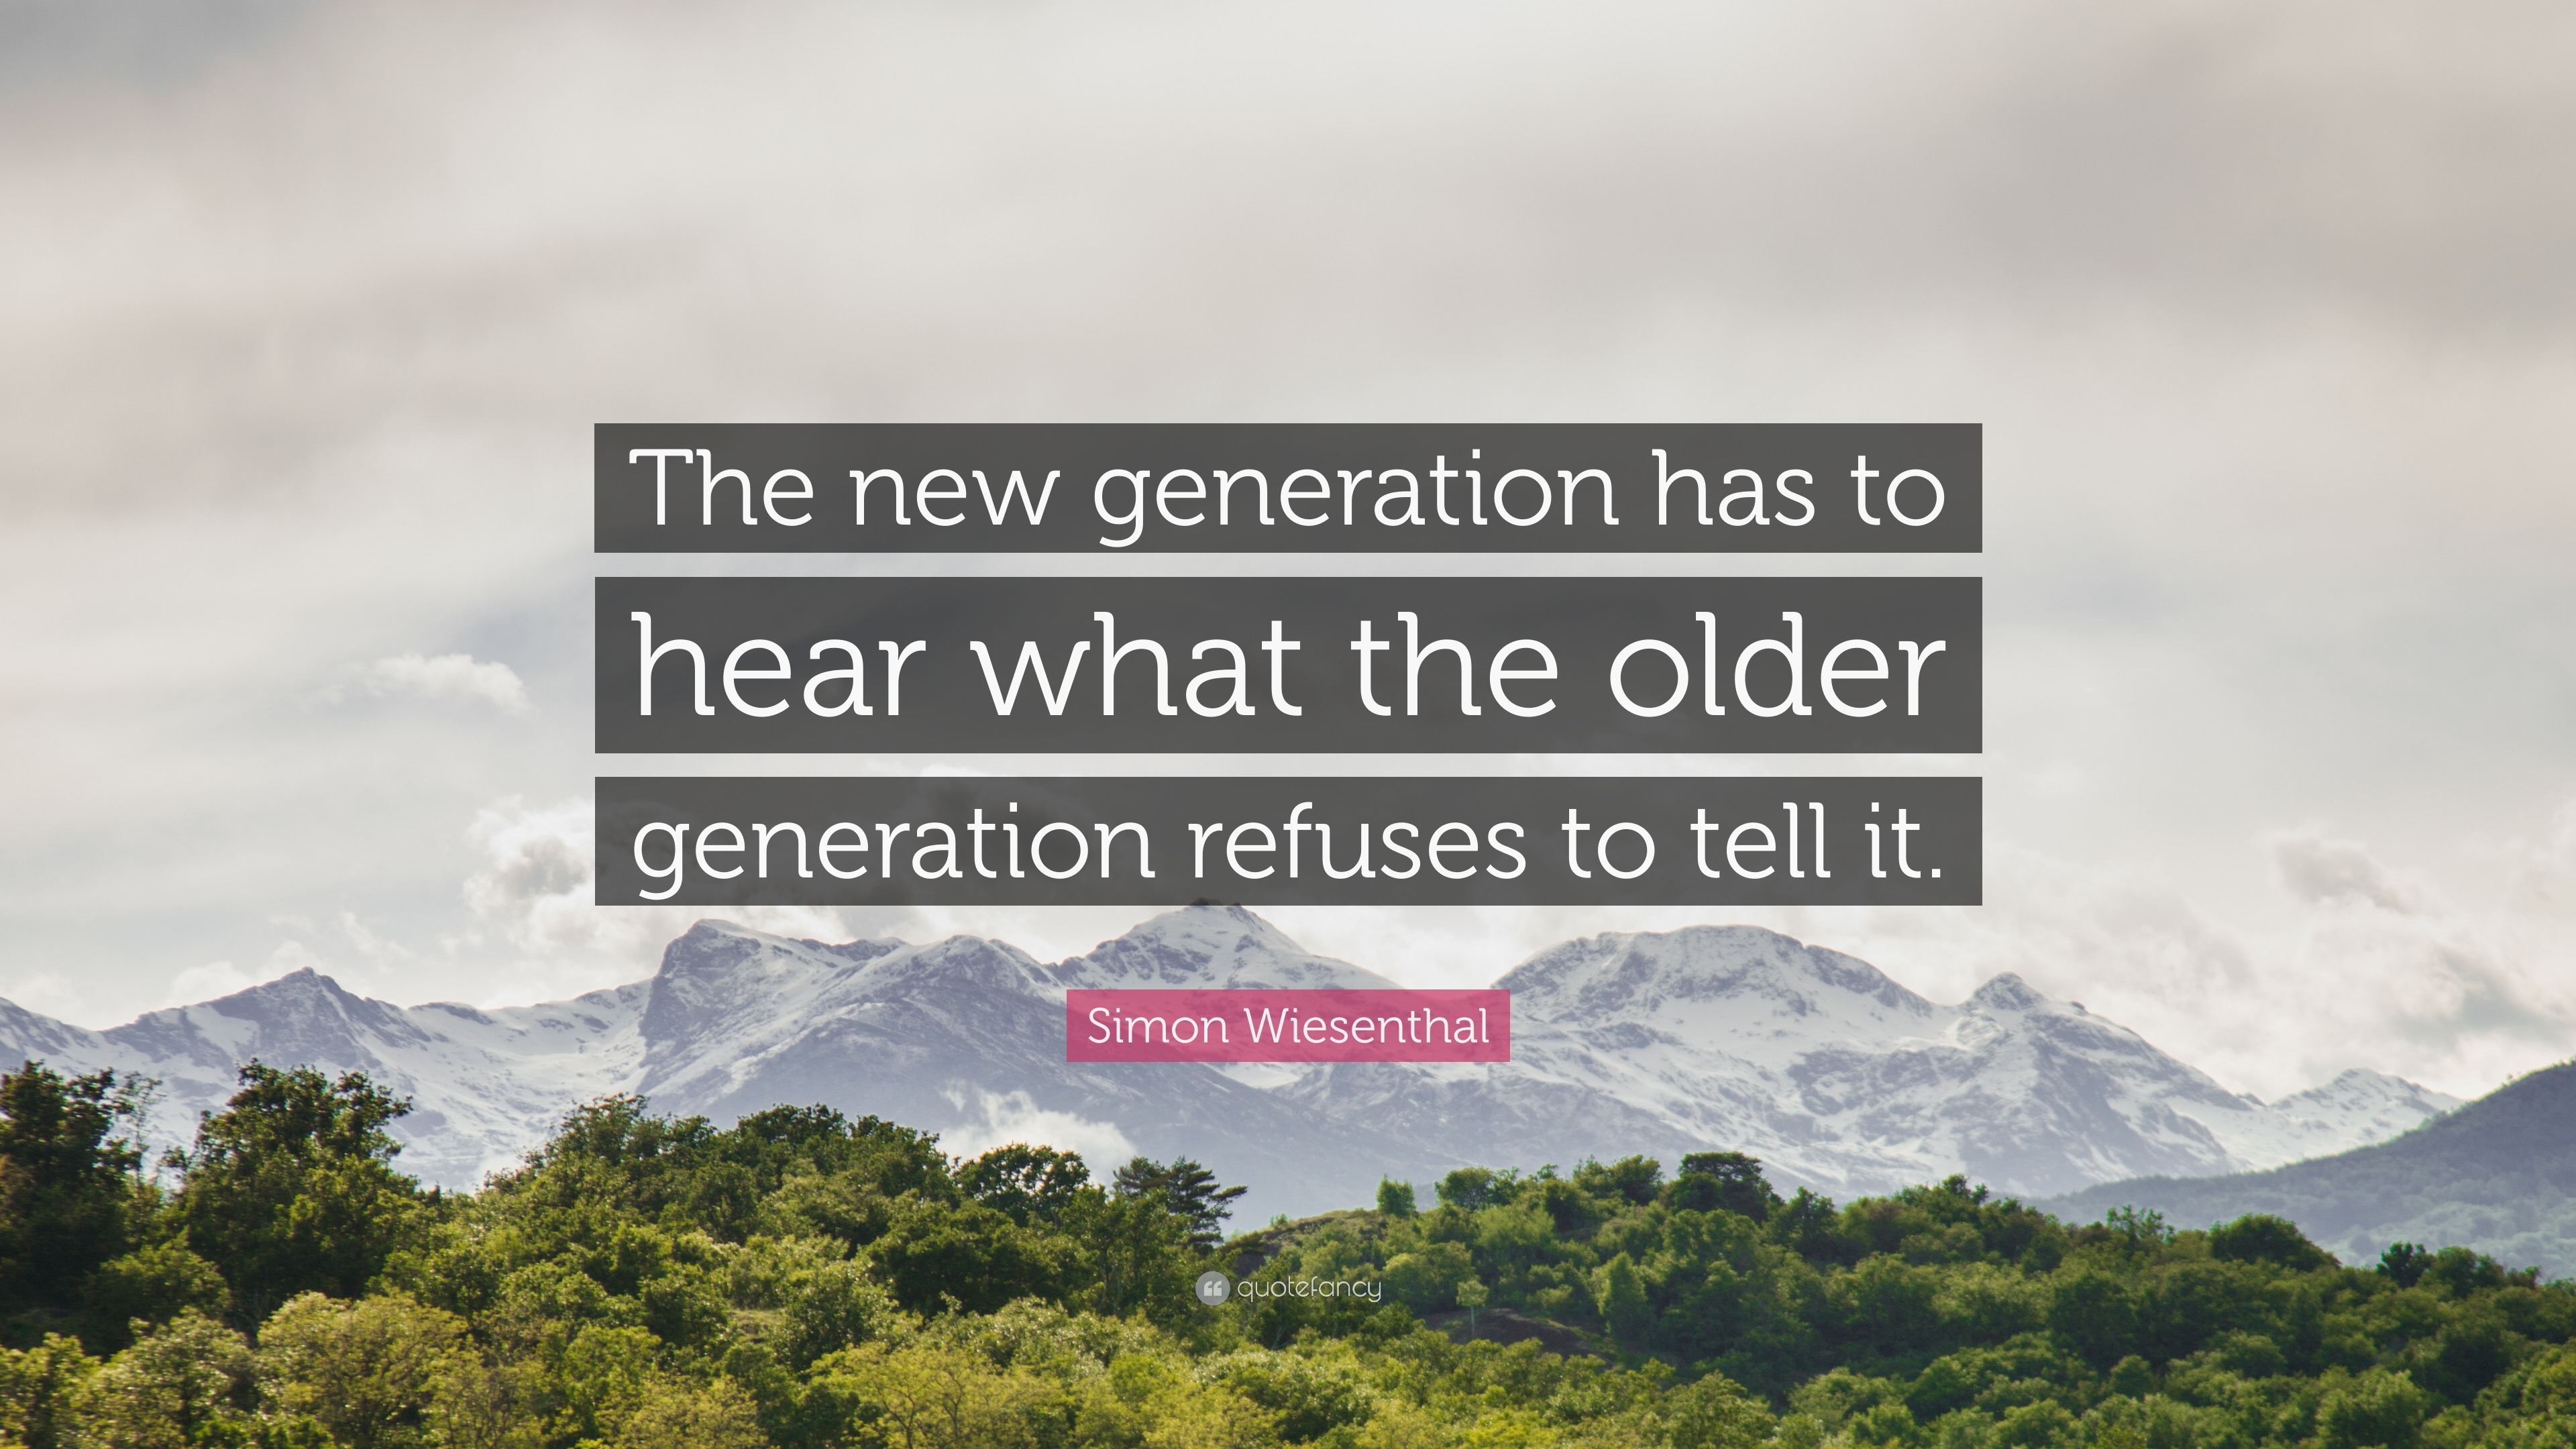 Simon Wiesenthal Quote: “The new generation hear what the generation refuses to tell